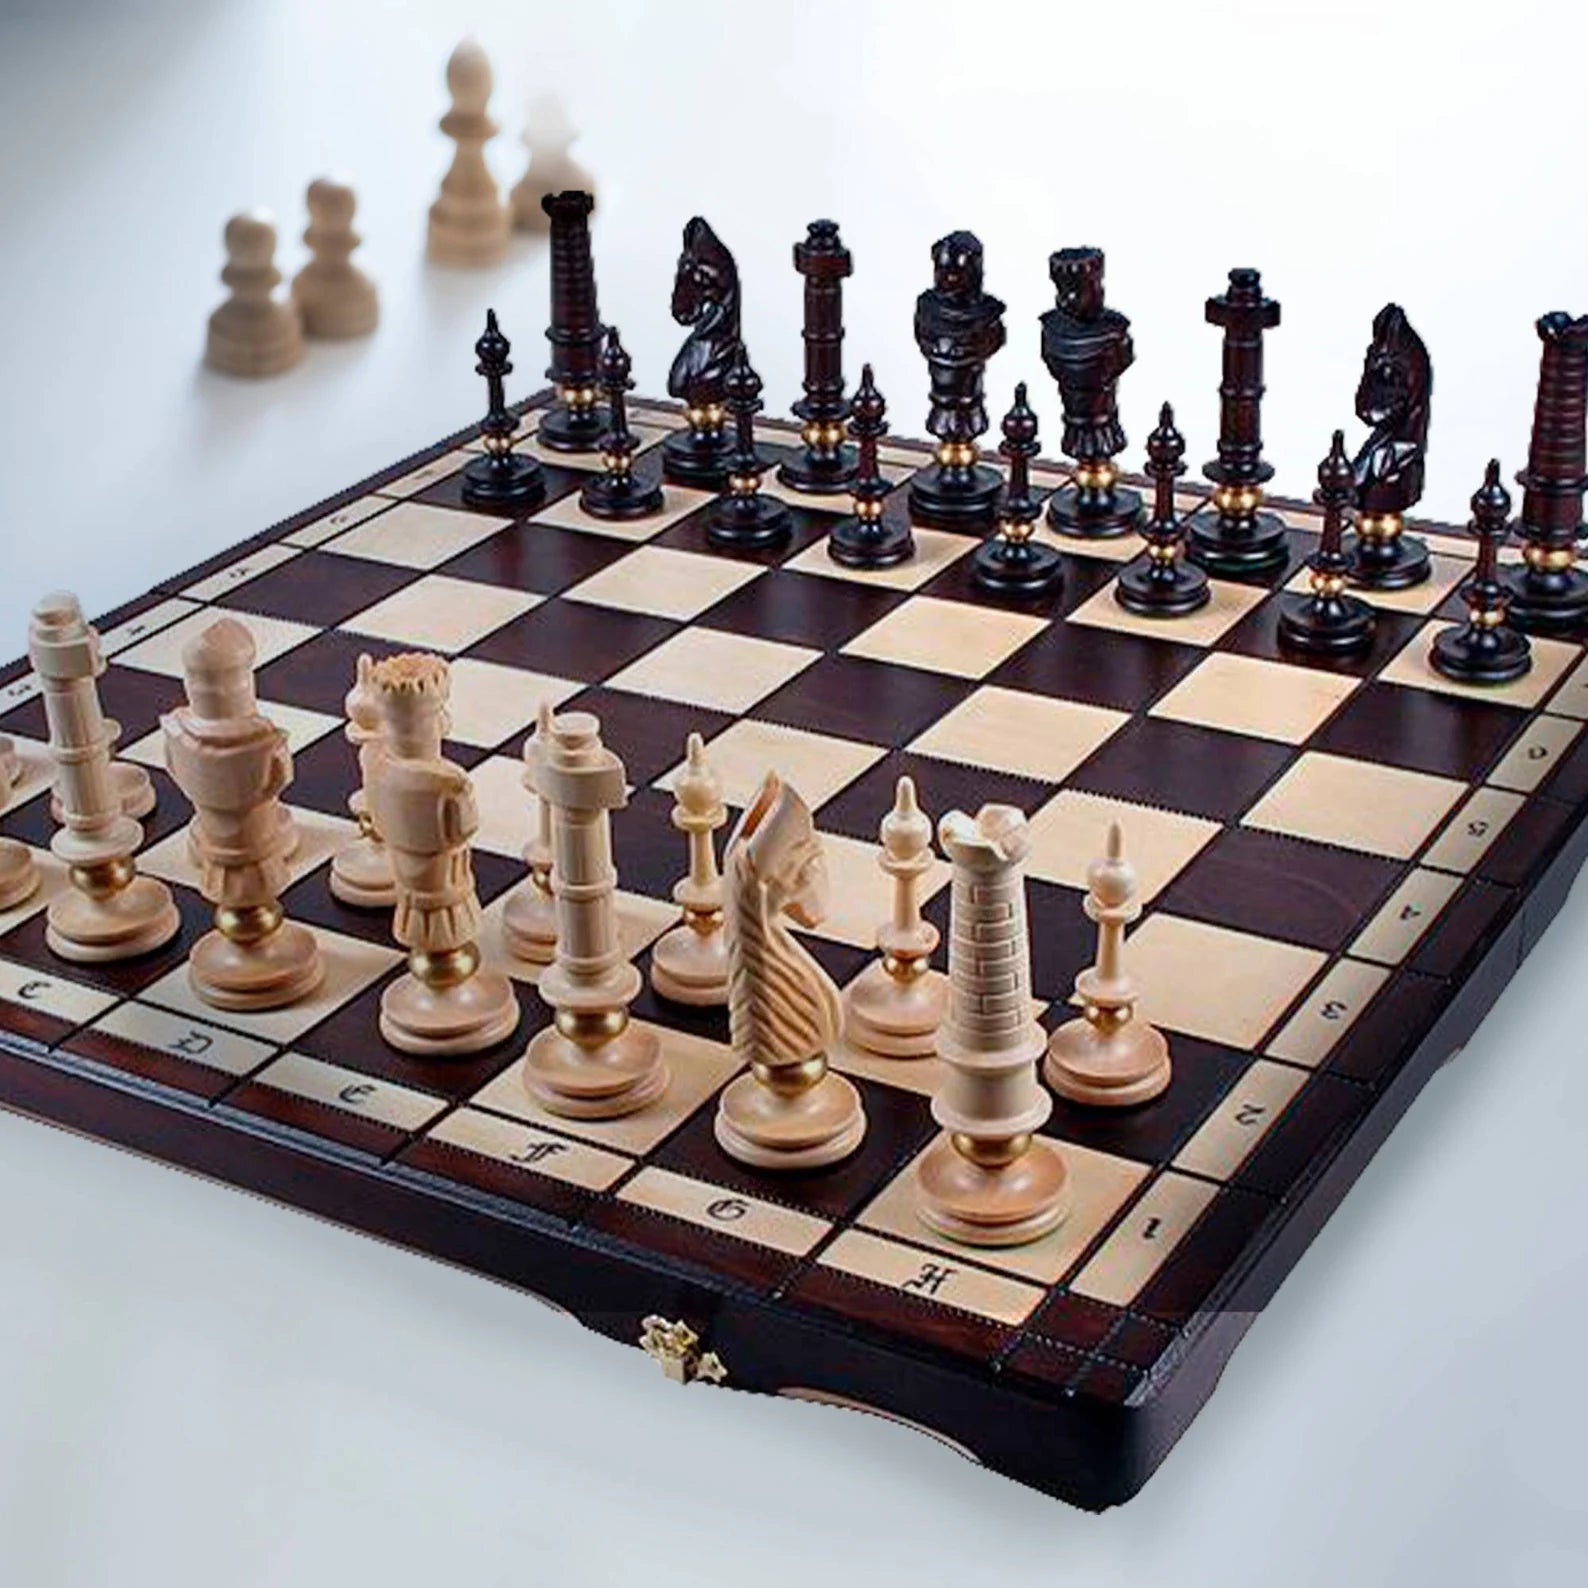 Unique Chess set Royal Lux - Luxury Large Chess Set with a board - 25.5"x12.8"x3" (650x325x80 мм)